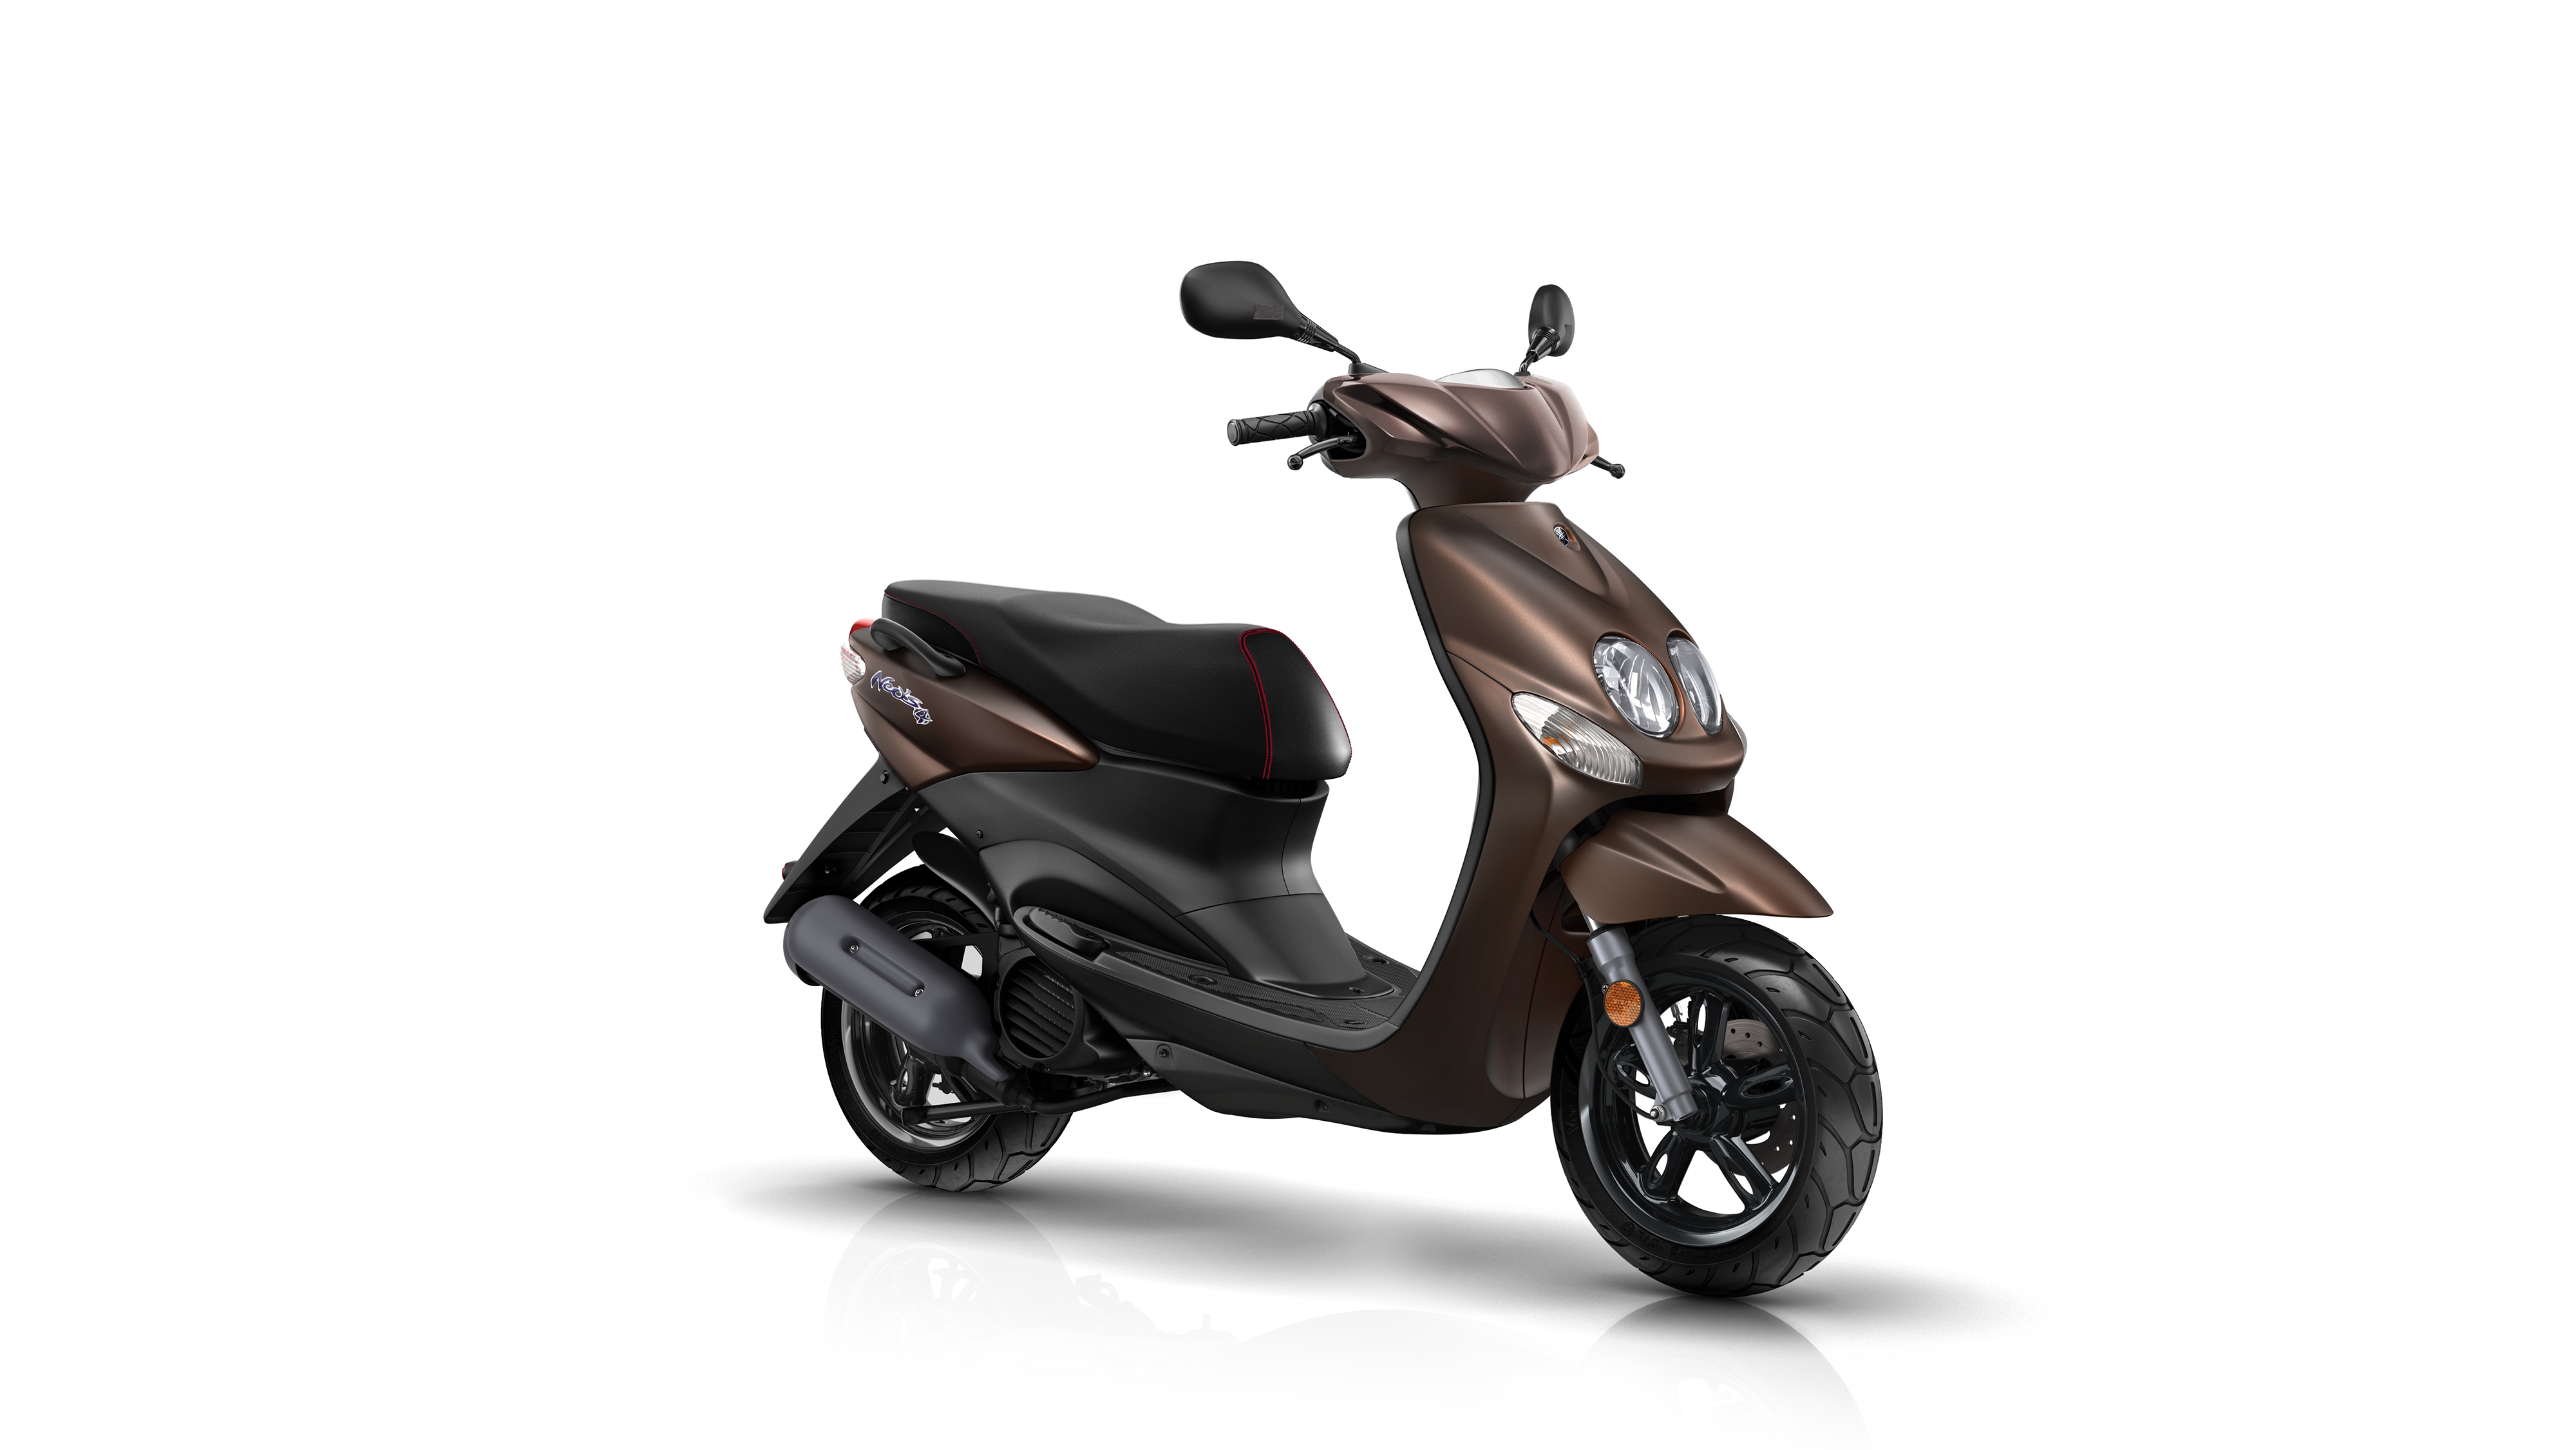 New X-MAX IRON MAX heads Yamaha scooter updates for 2016